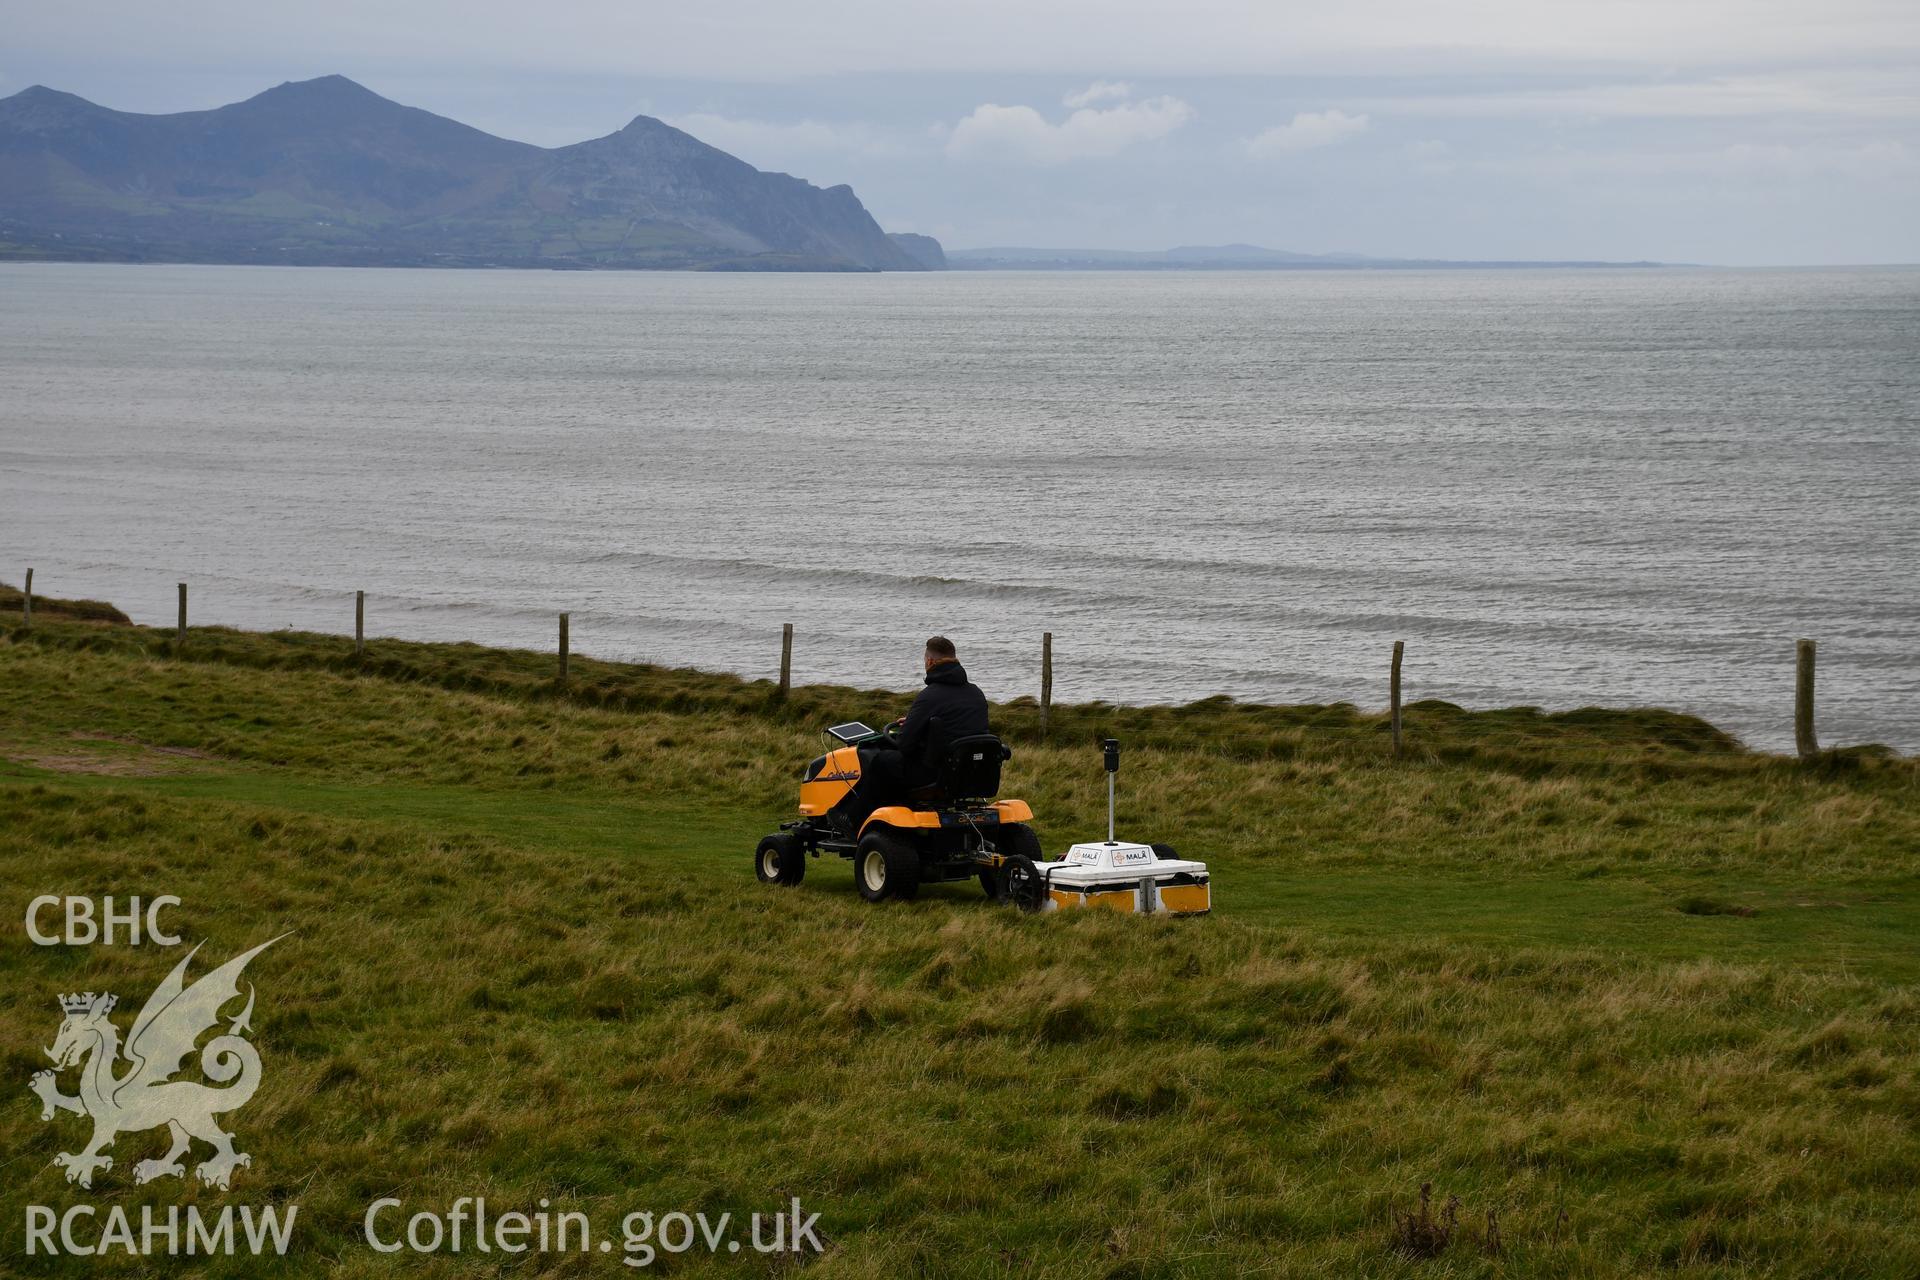 GPR survey of the site Taken by Toby Driver. Produced with EU funds through the Ireland Wales Co-operation Programme 2014-2023. All material made freely available through the Open Government Licence.